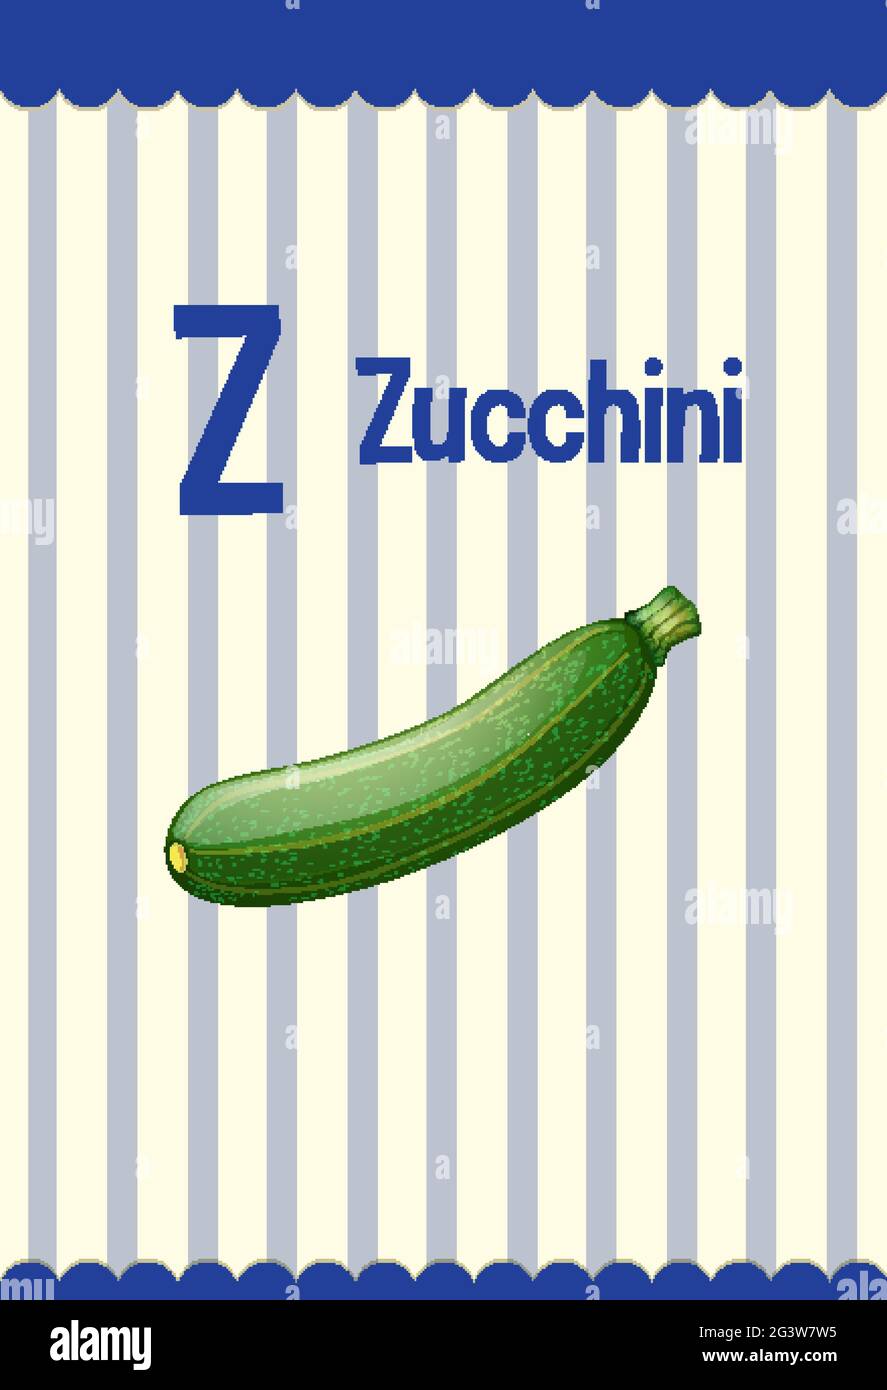 Alphabet flashcard with letter Z for Zucchini illustration Stock Vector